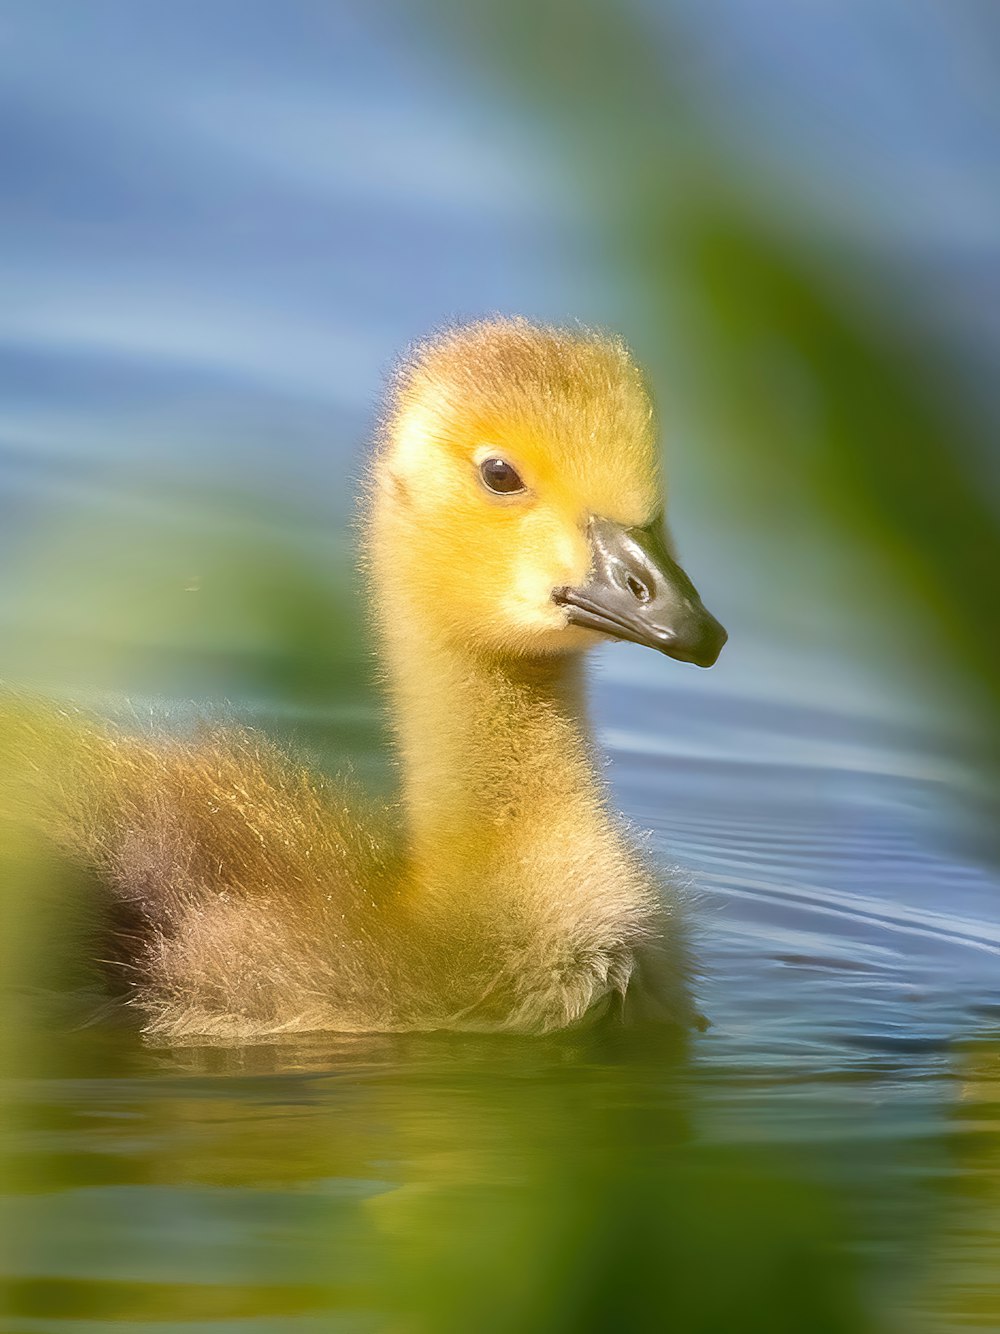 a duckling swimming in the water with a blurry background